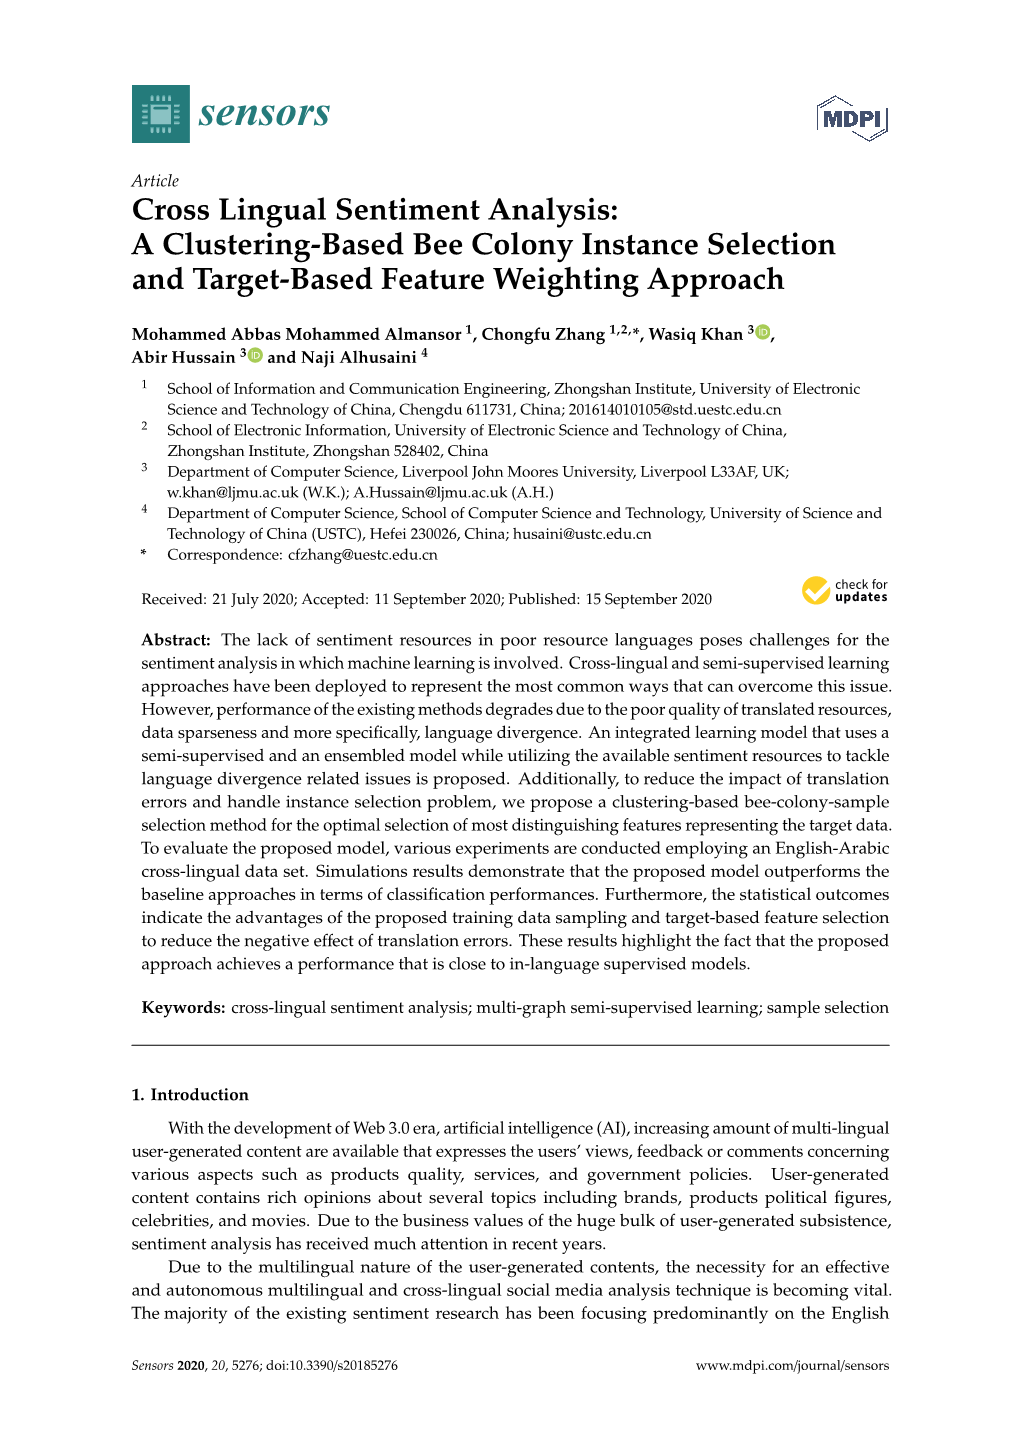 Cross Lingual Sentiment Analysis: a Clustering-Based Bee Colony Instance Selection and Target-Based Feature Weighting Approach